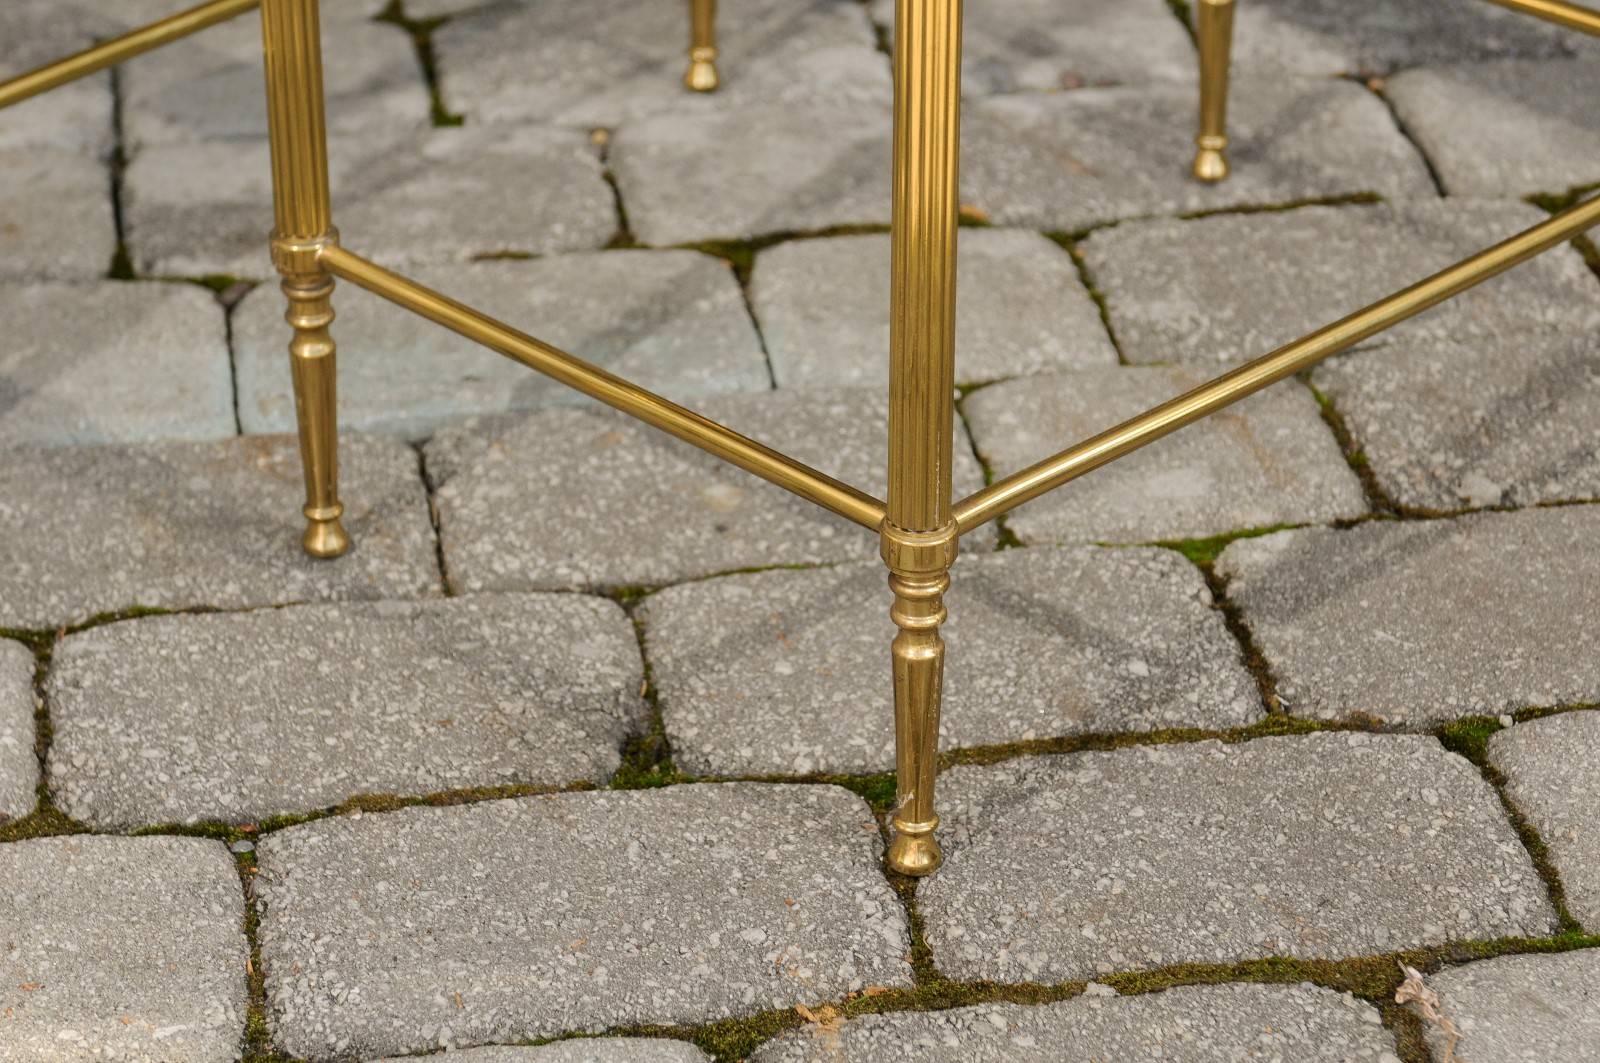 Set of Three 1950s French Brass and Glass Nesting Tables with Beaded Trim For Sale 4